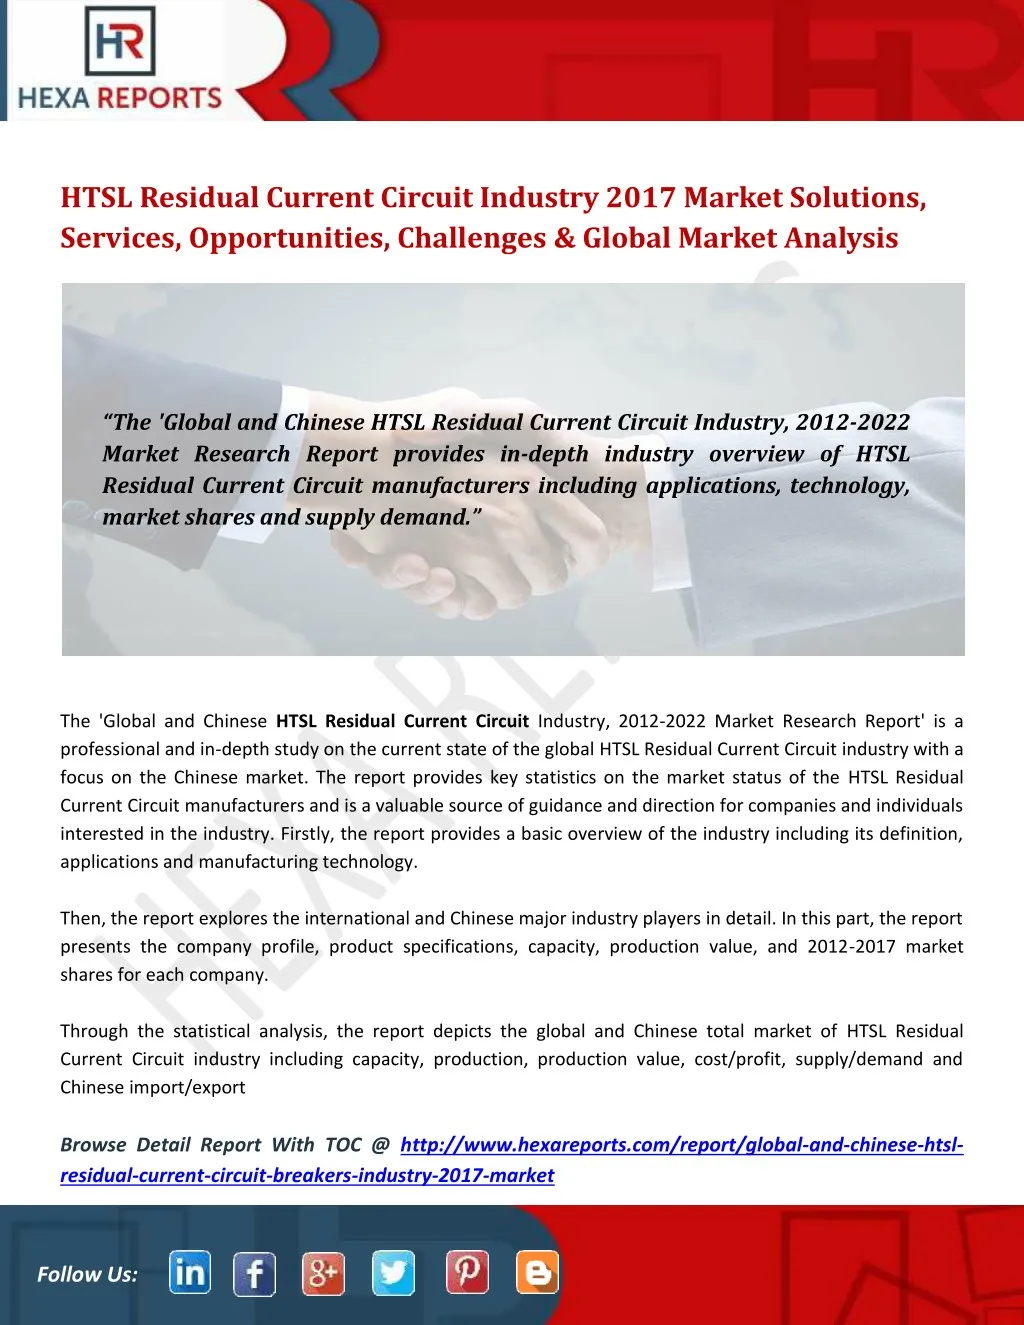 htsl residual current circuit industry 2017